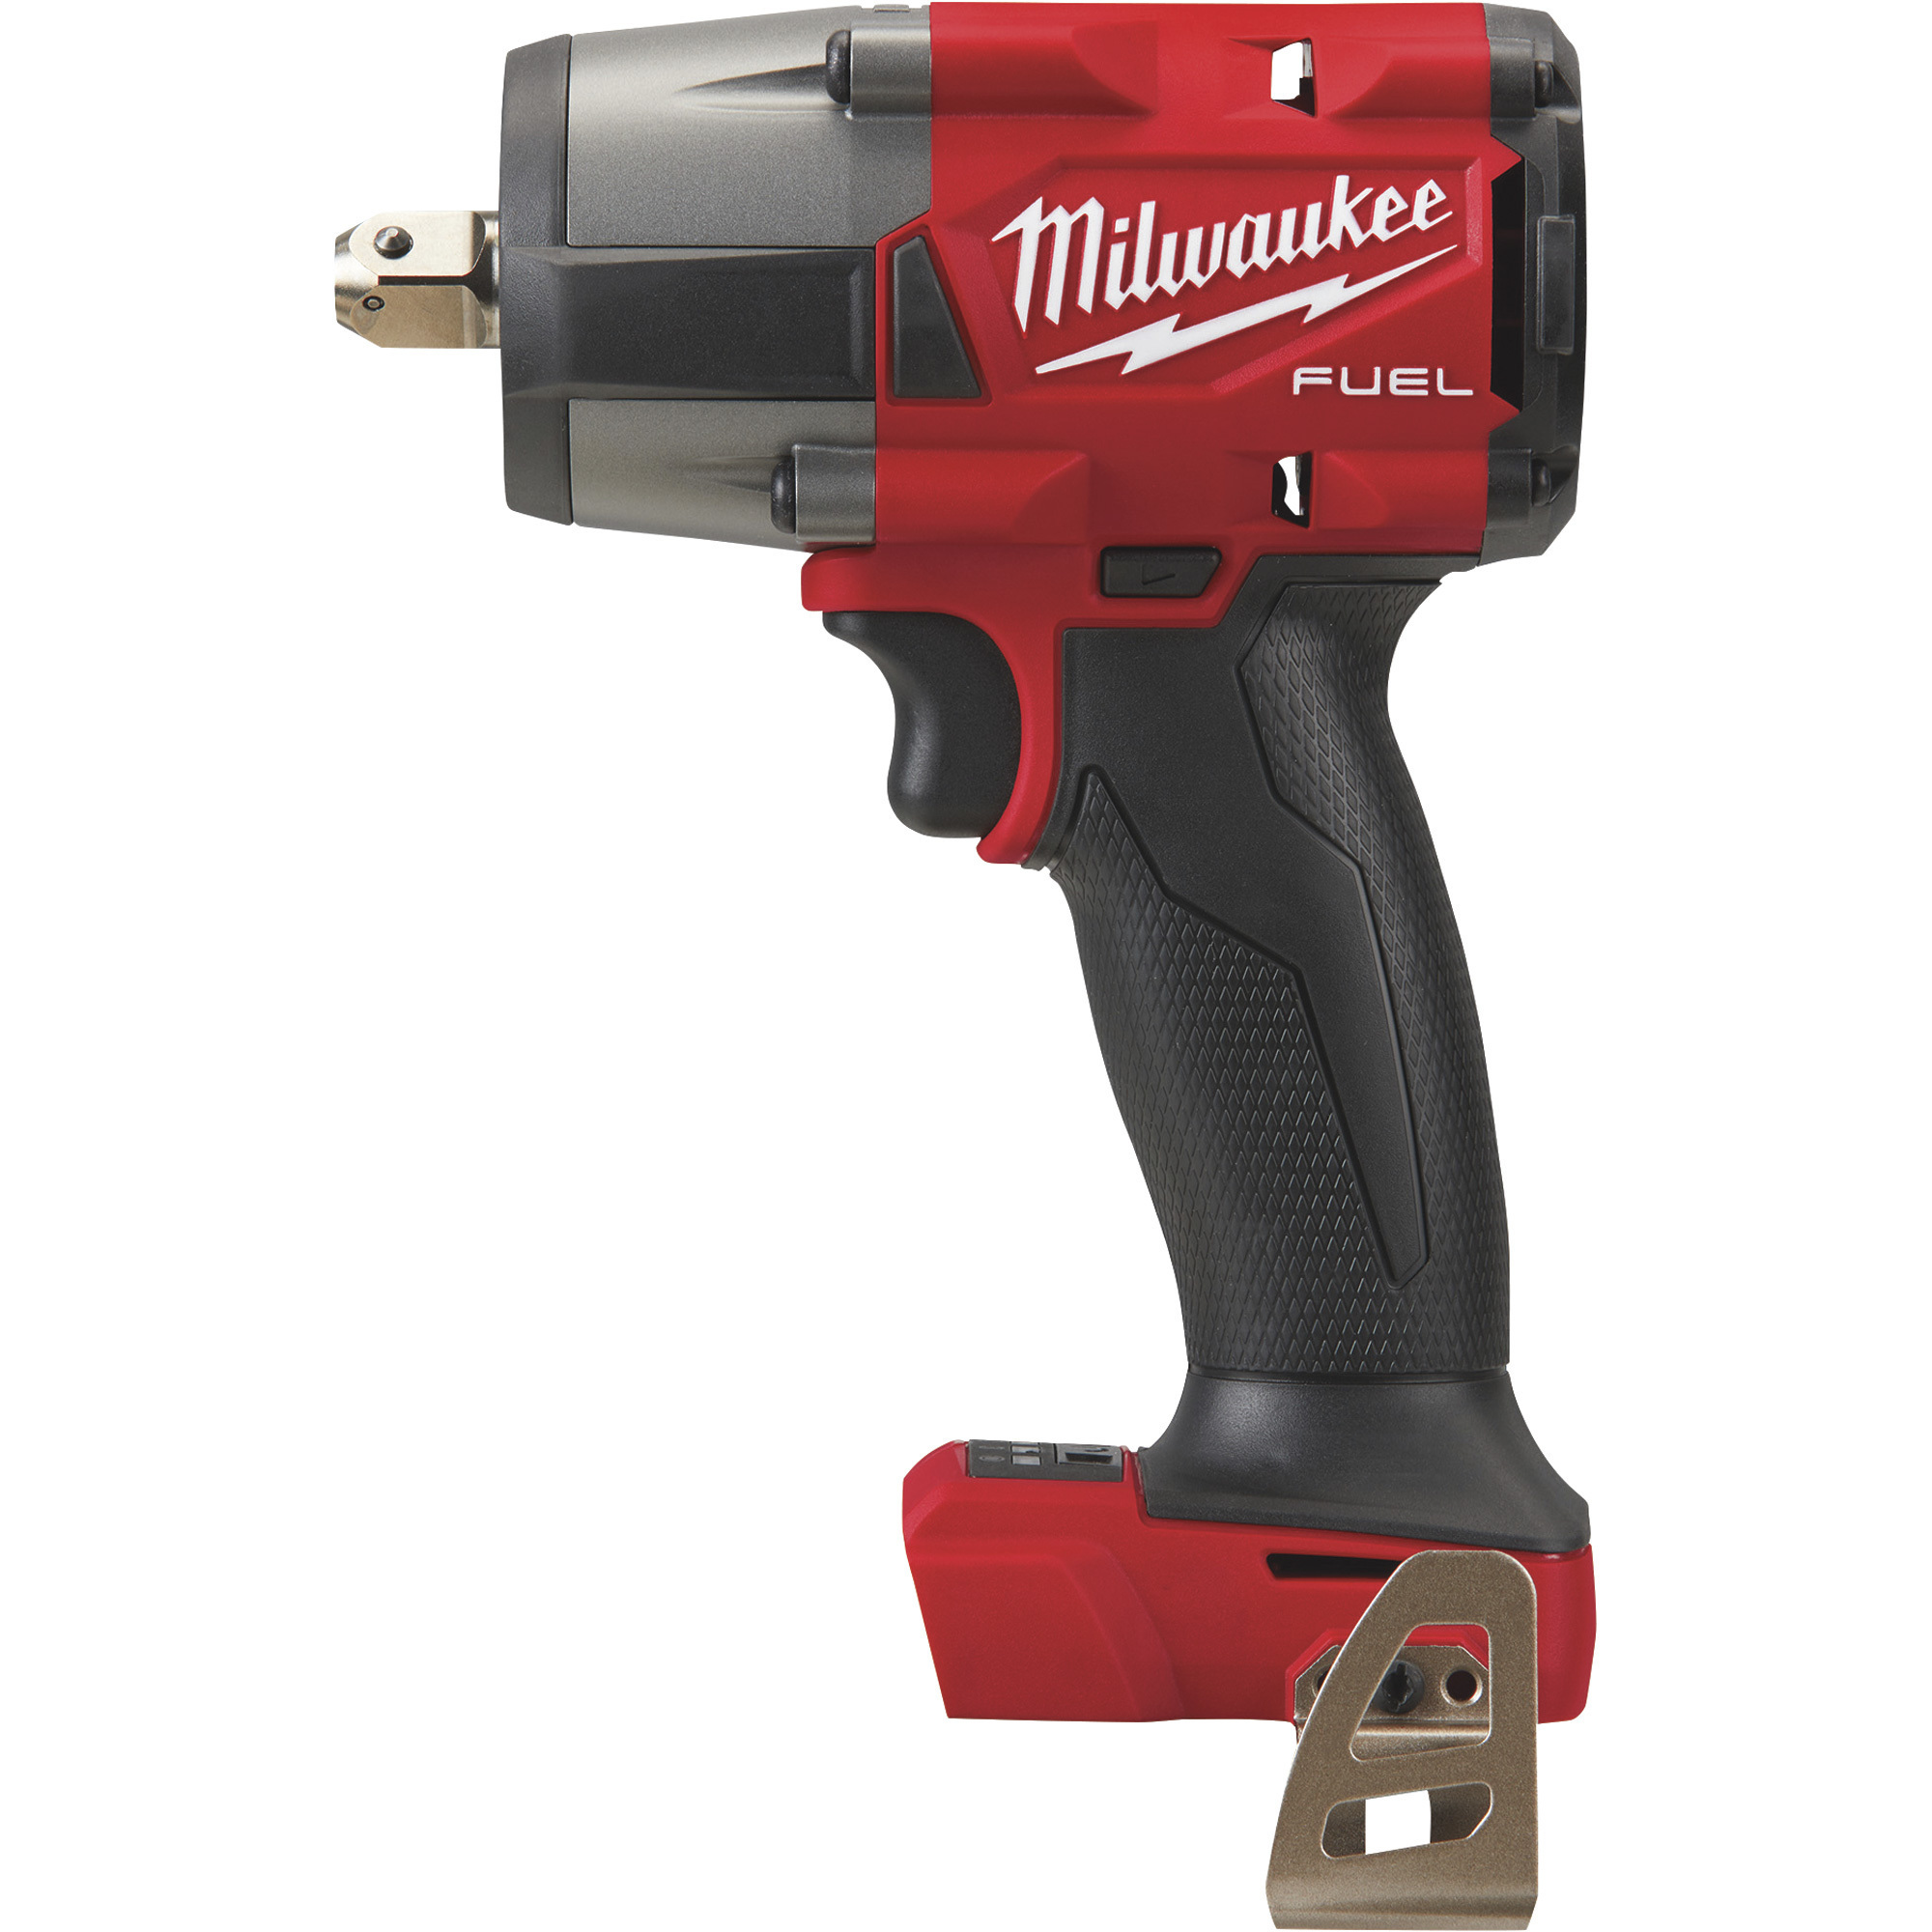 M18 FUEL Cordless Mid-Torque Impact Wrench with Pin Detent — Tool Only, 1/2Inch Drive, 650 Ft./Lbs. Torque, Model - Milwaukee 2962P-20